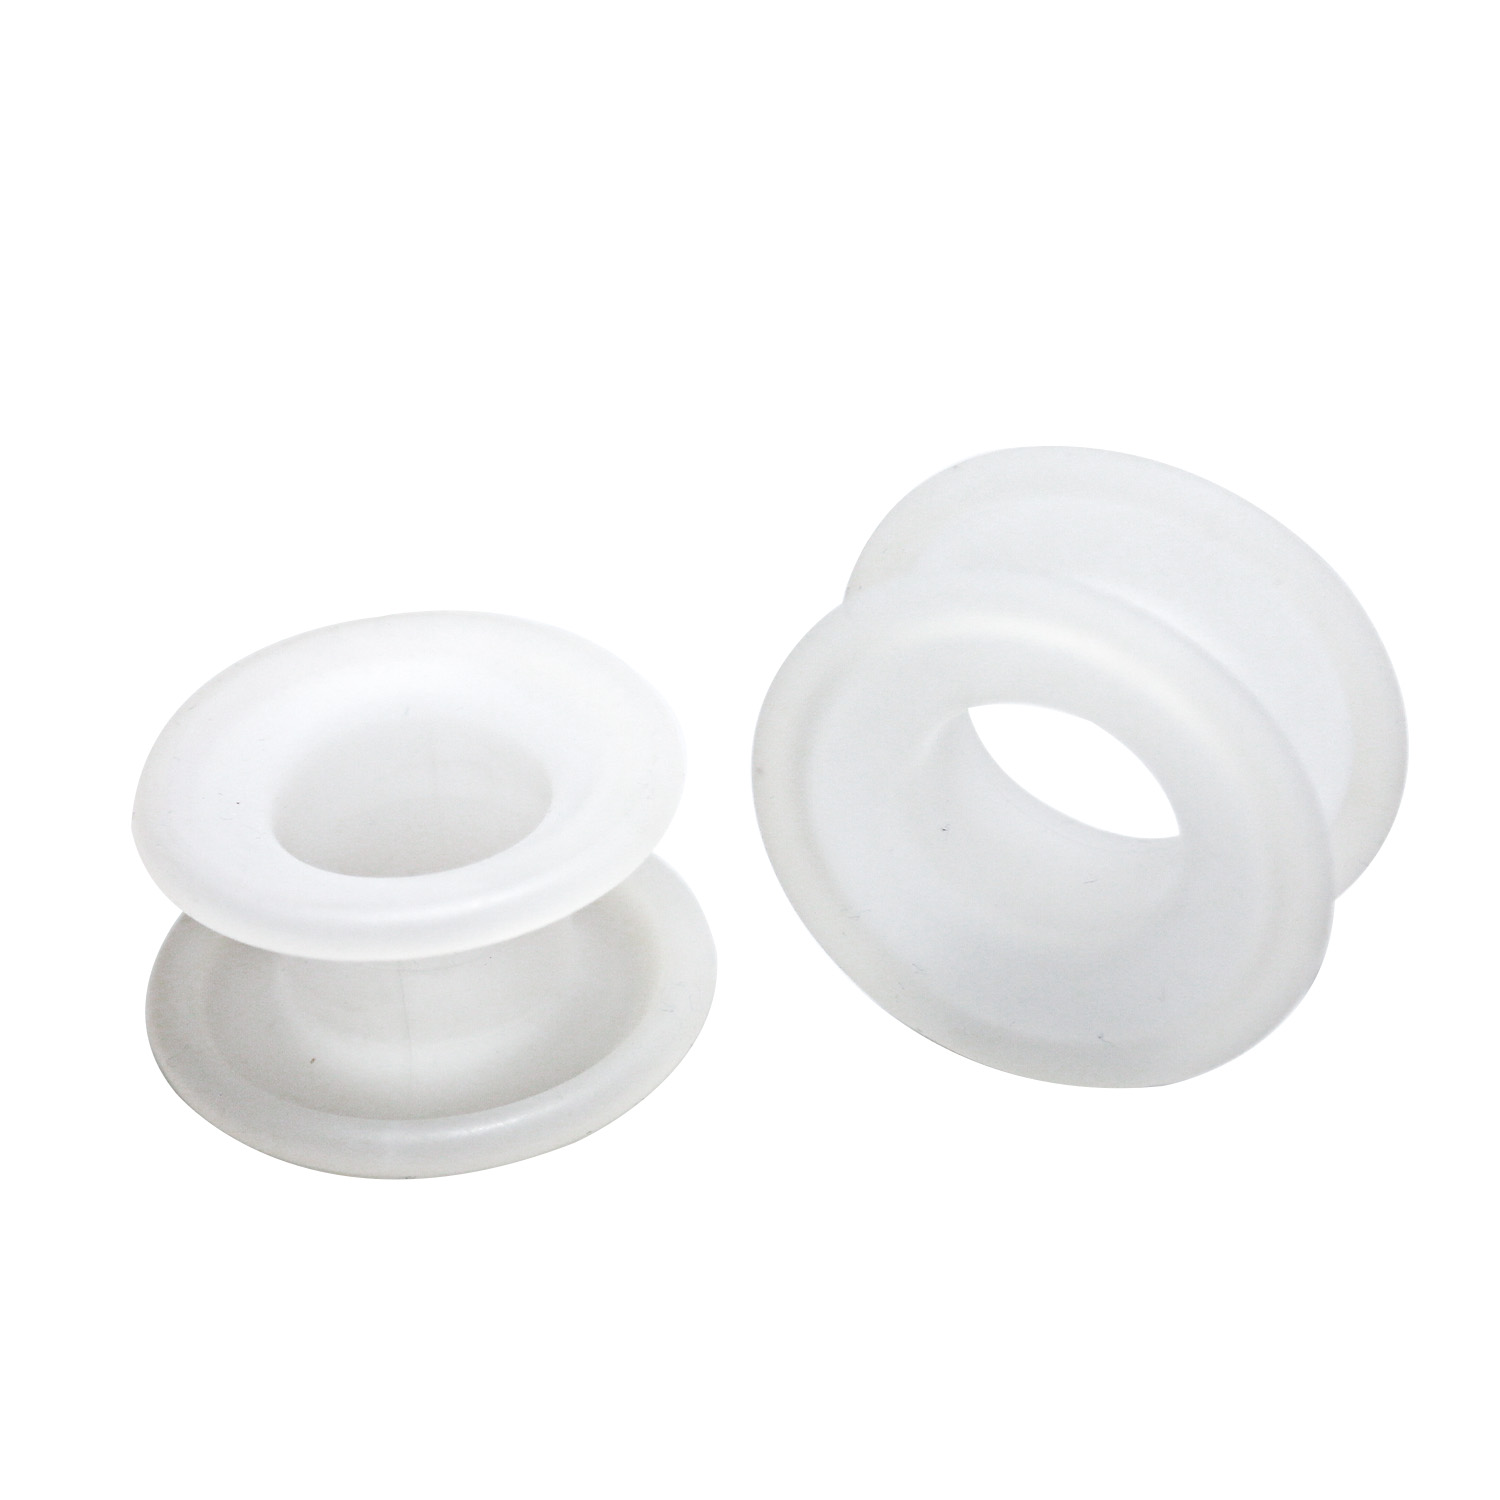 Male Superior Material Strength Transparent Incision Sleeve